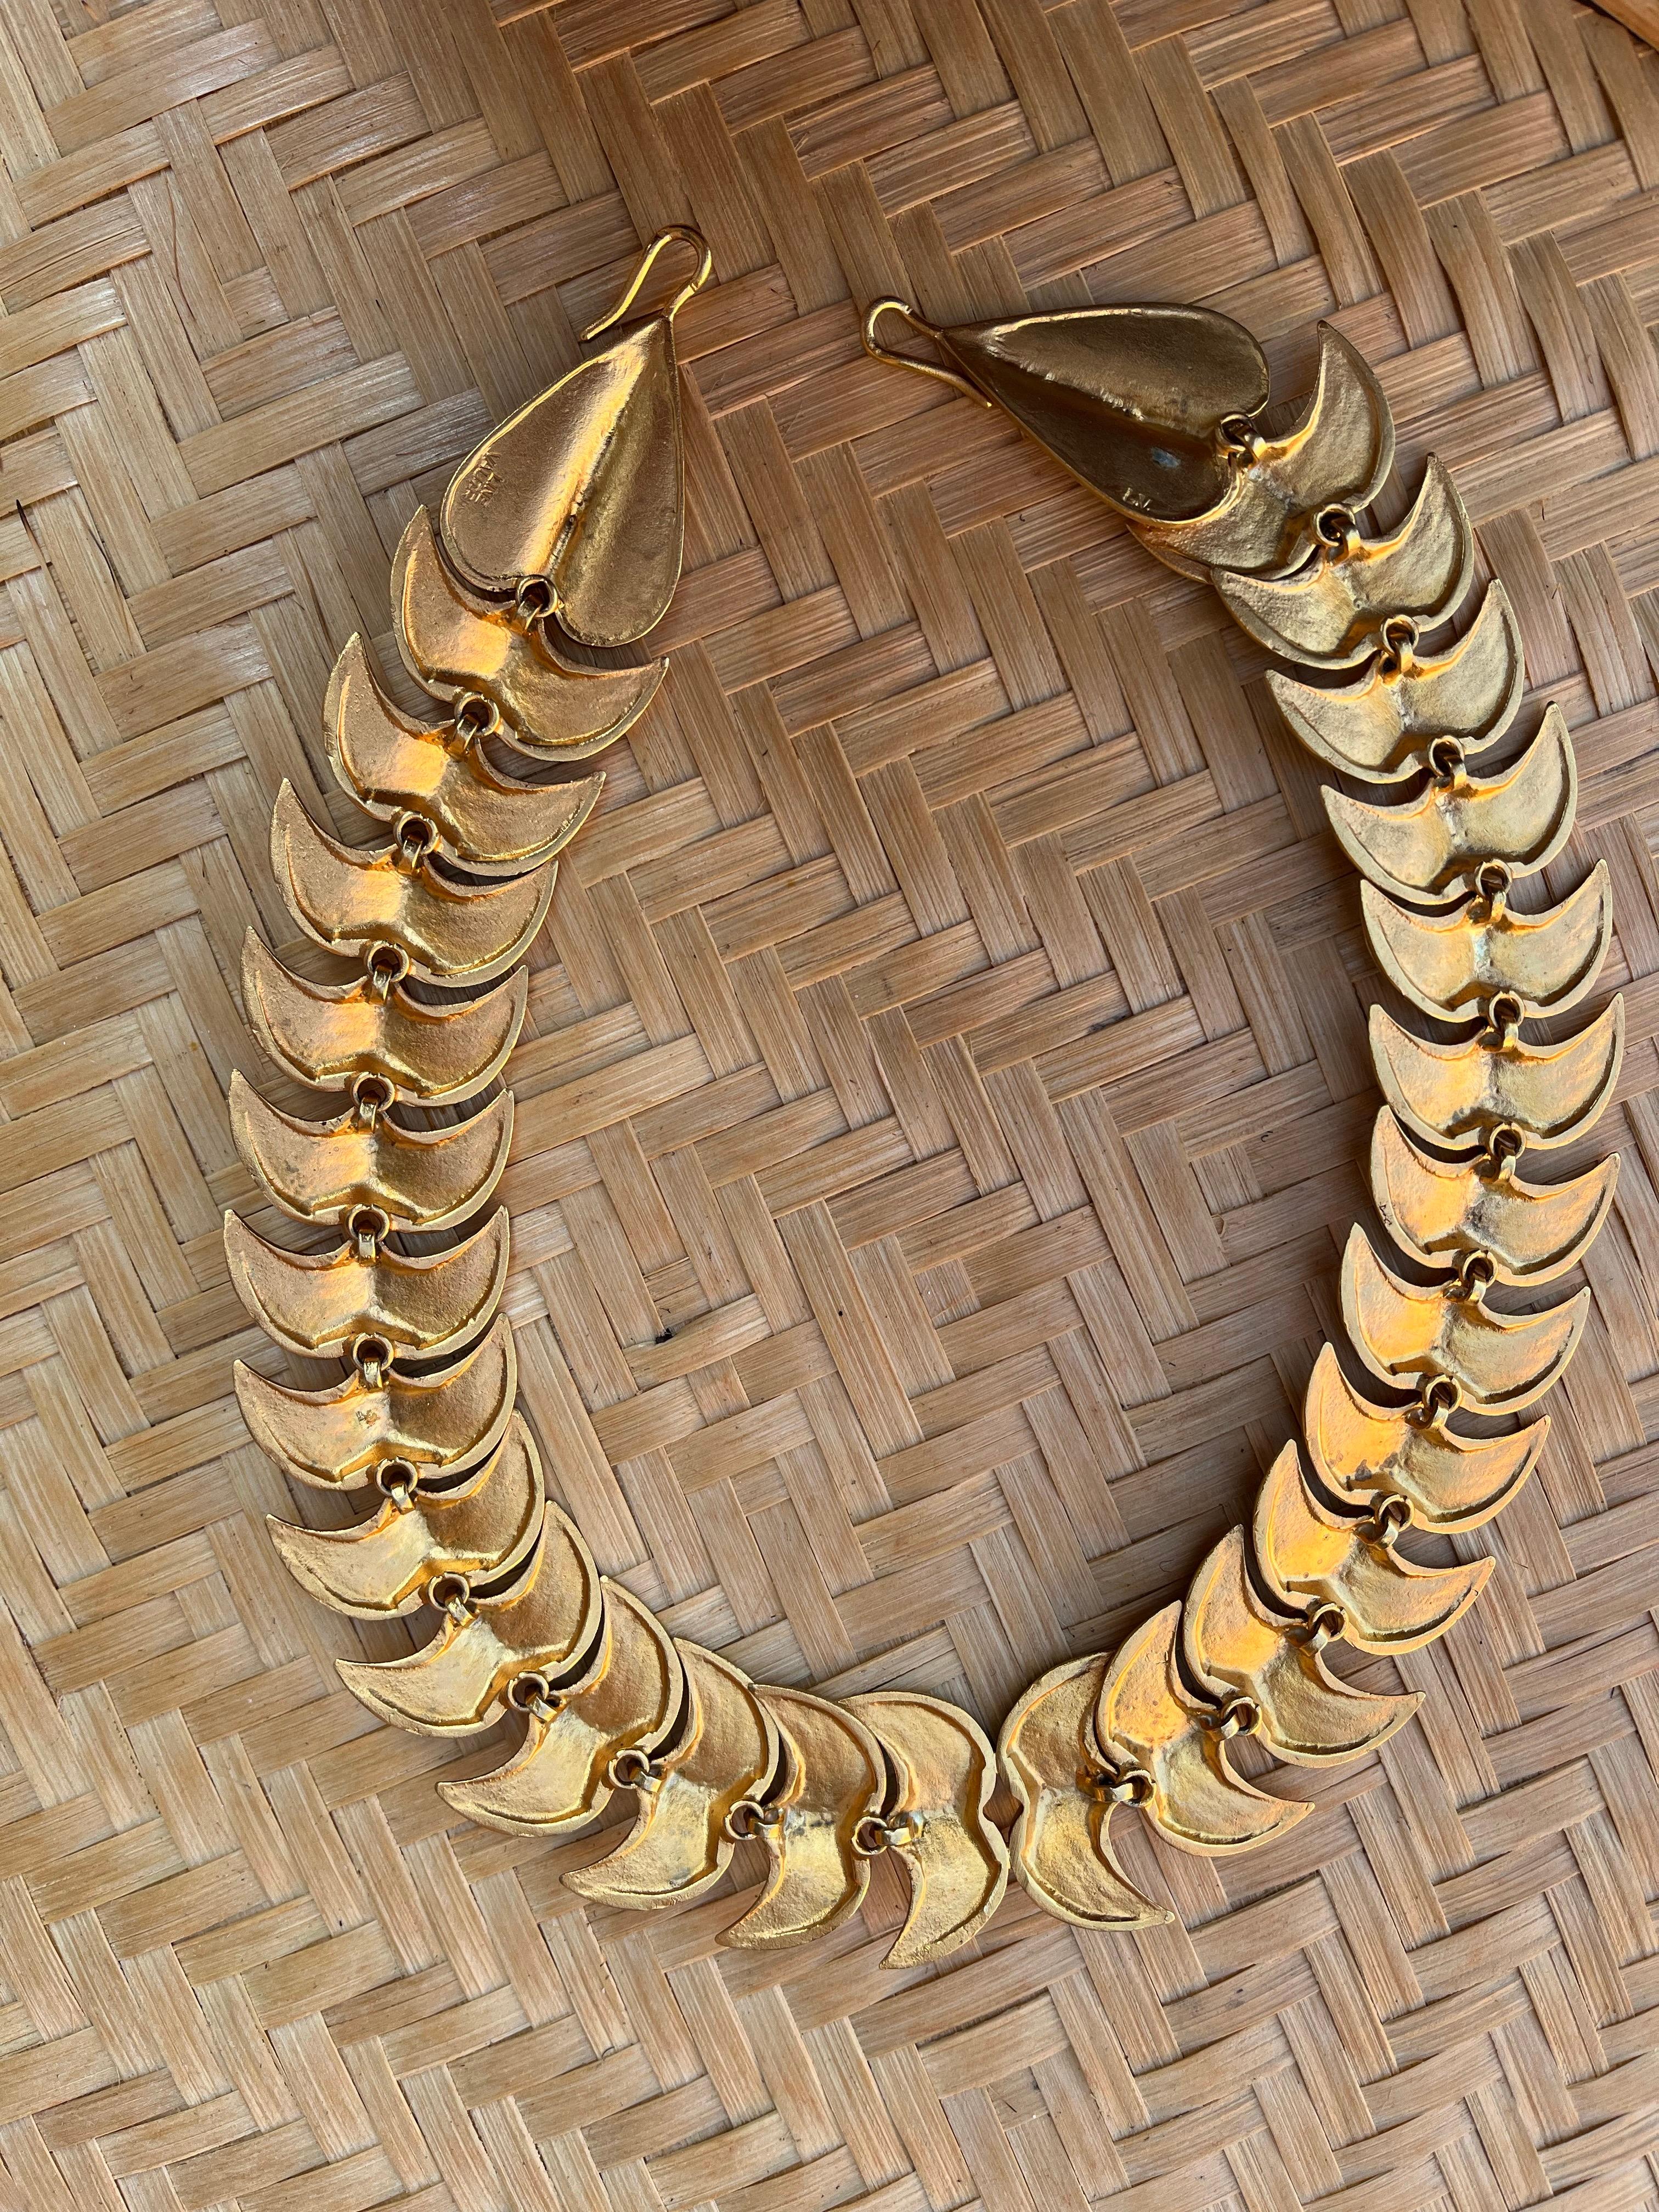 Vertebrae Necklace by Line Vautrin - Gilt Bronze ( 22K Gold Plated) - Signed Line Vautrin
Circa 1945
(46.2 x 2.2 cm)
Line Vautrin was a French jewelry maker, designer, and decorative artist. Best known for her uncategorizable manufacture of objects